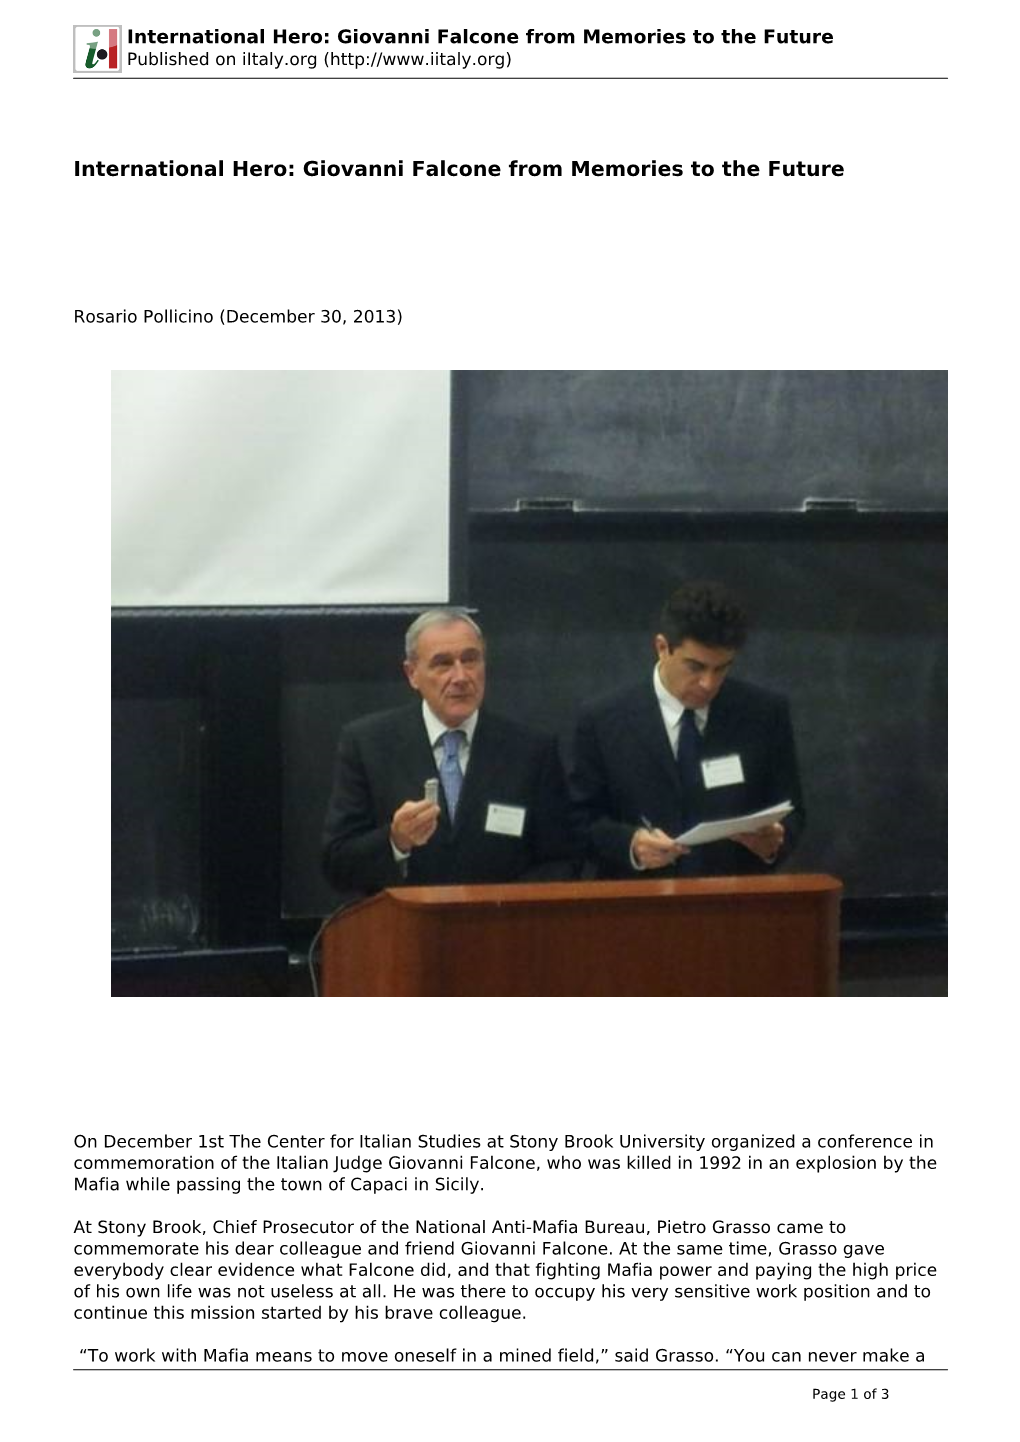 Giovanni Falcone from Memories to the Future Published on Iitaly.Org (